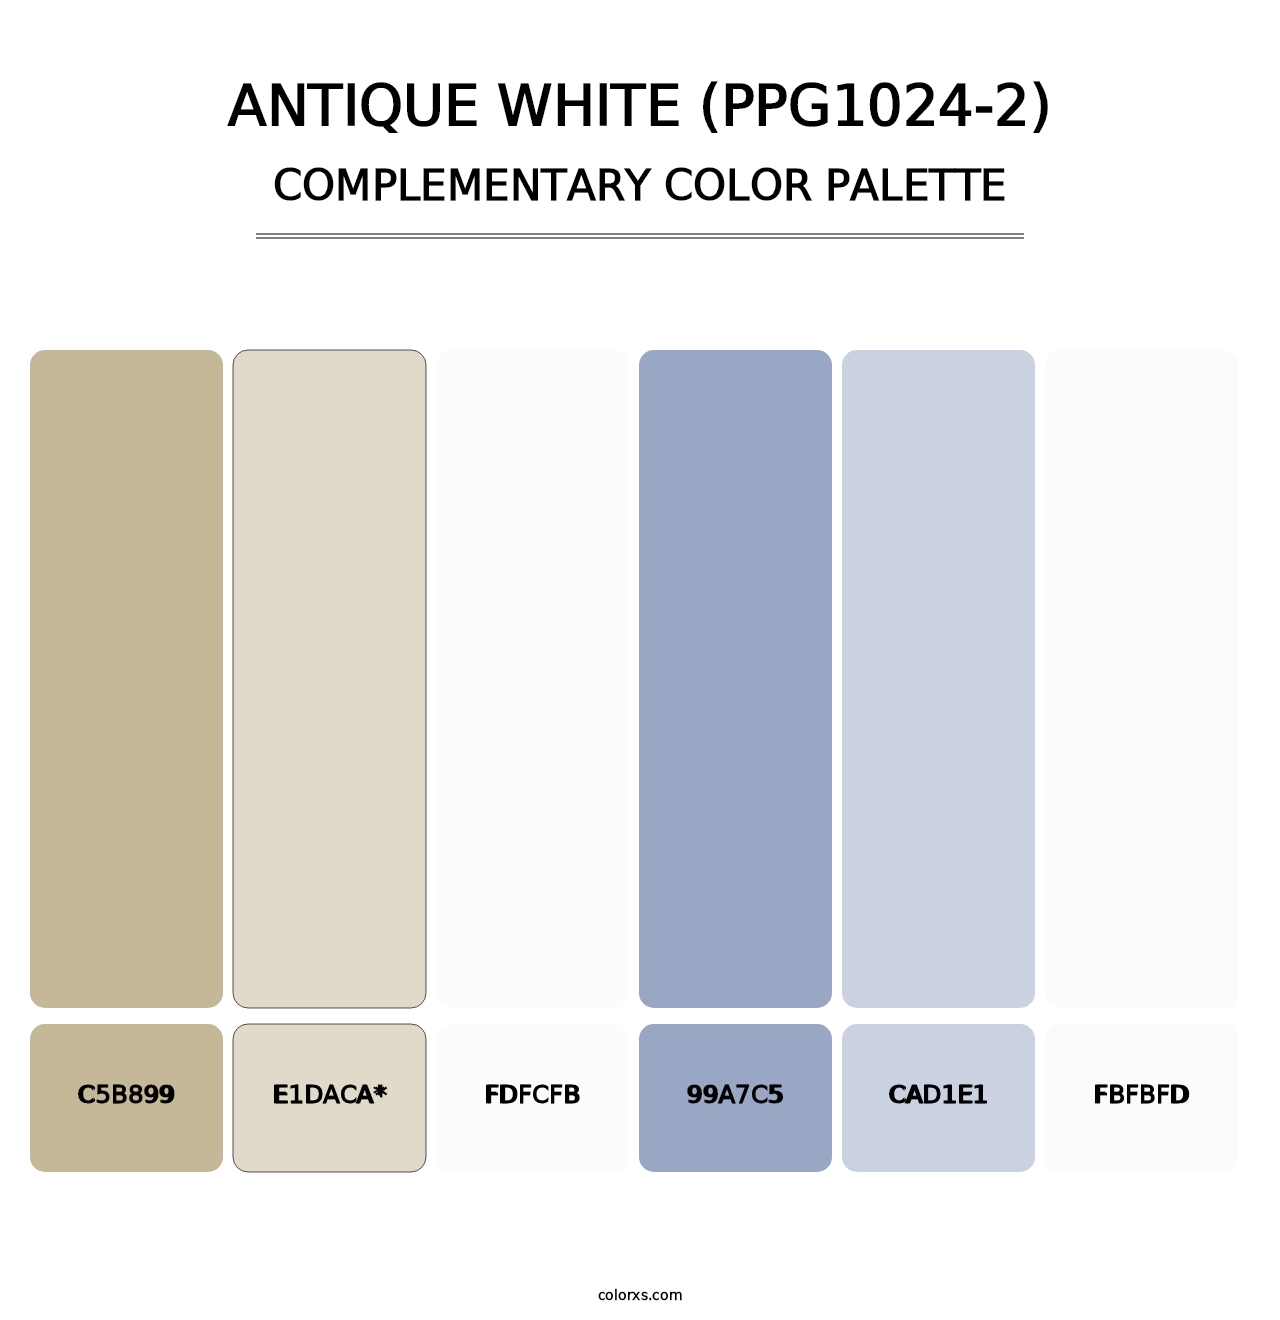 Antique White (PPG1024-2) - Complementary Color Palette